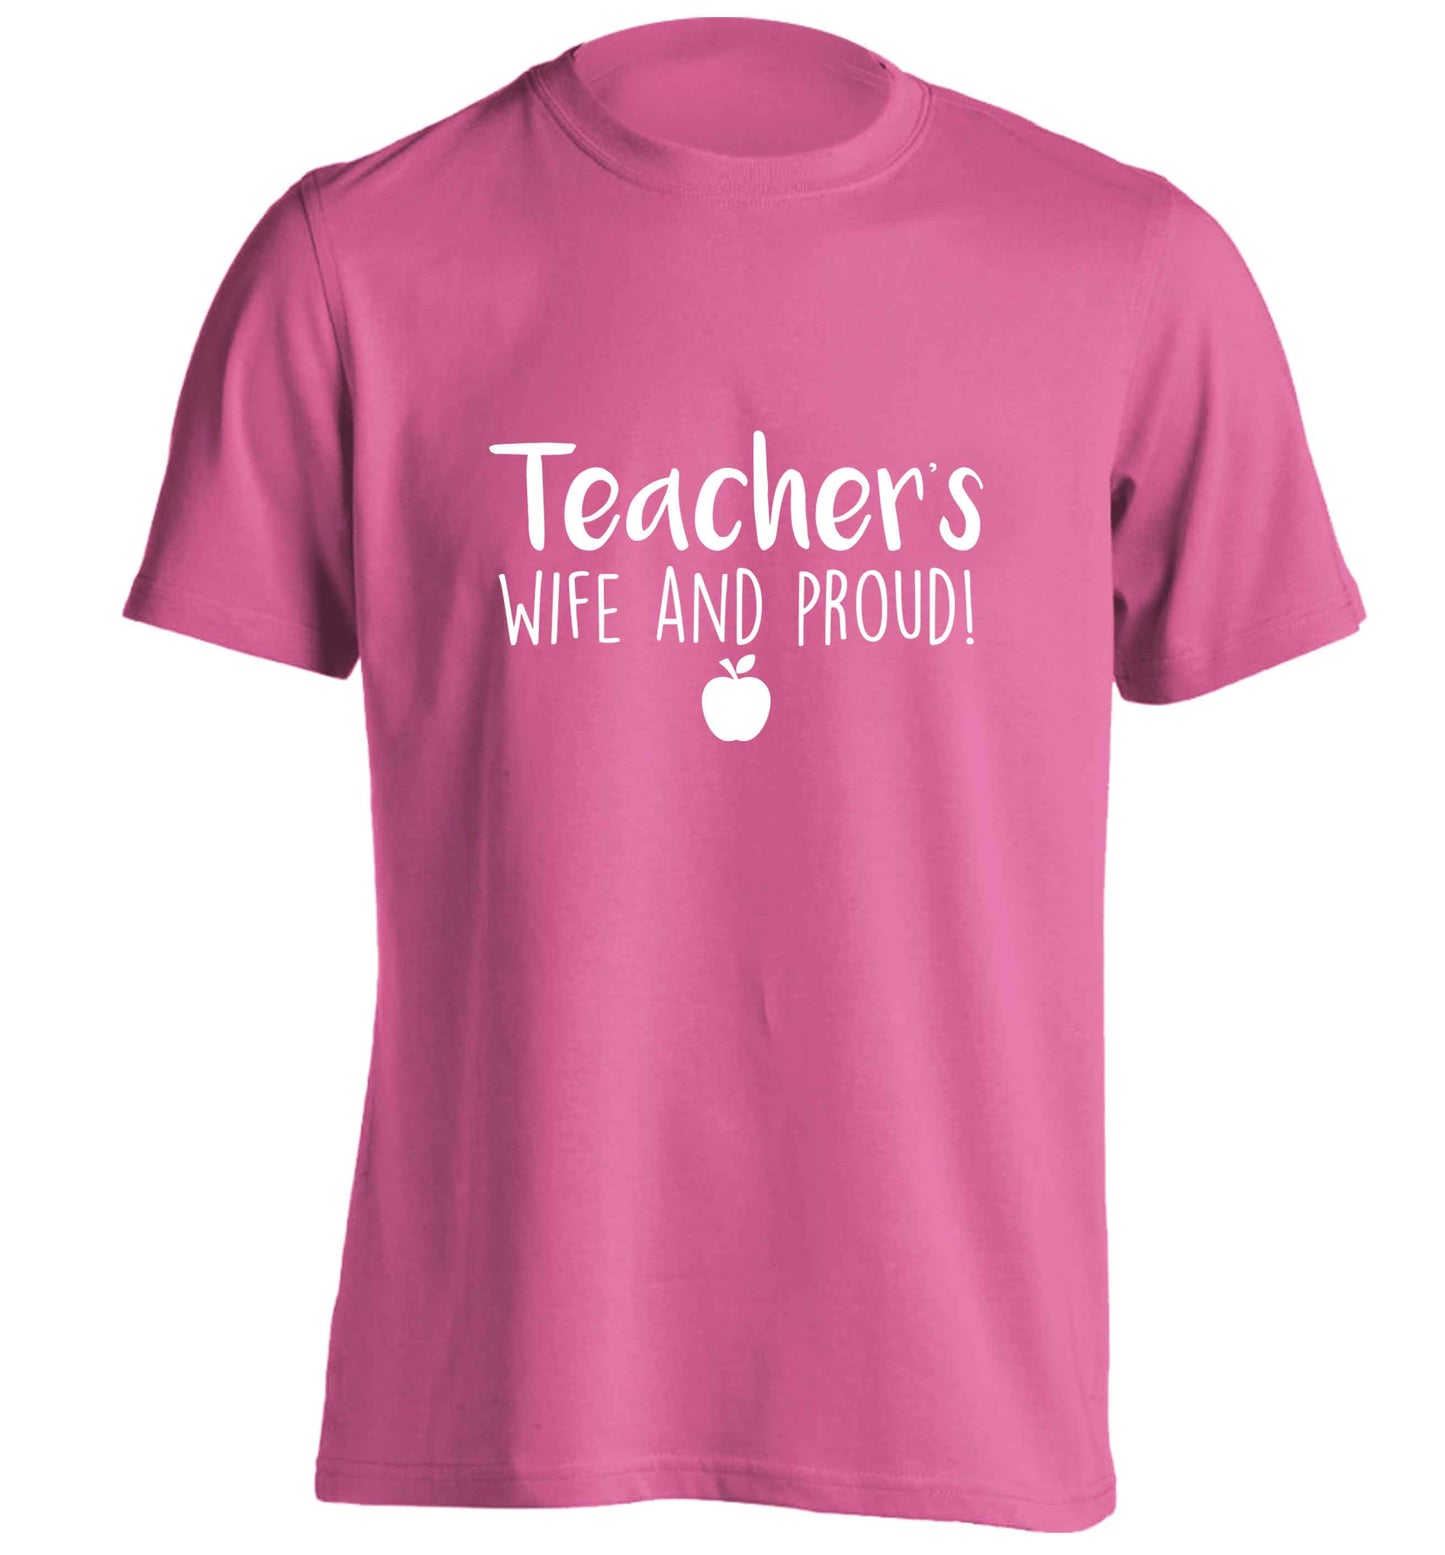 Teachers wife and proud adults unisex pink Tshirt 2XL